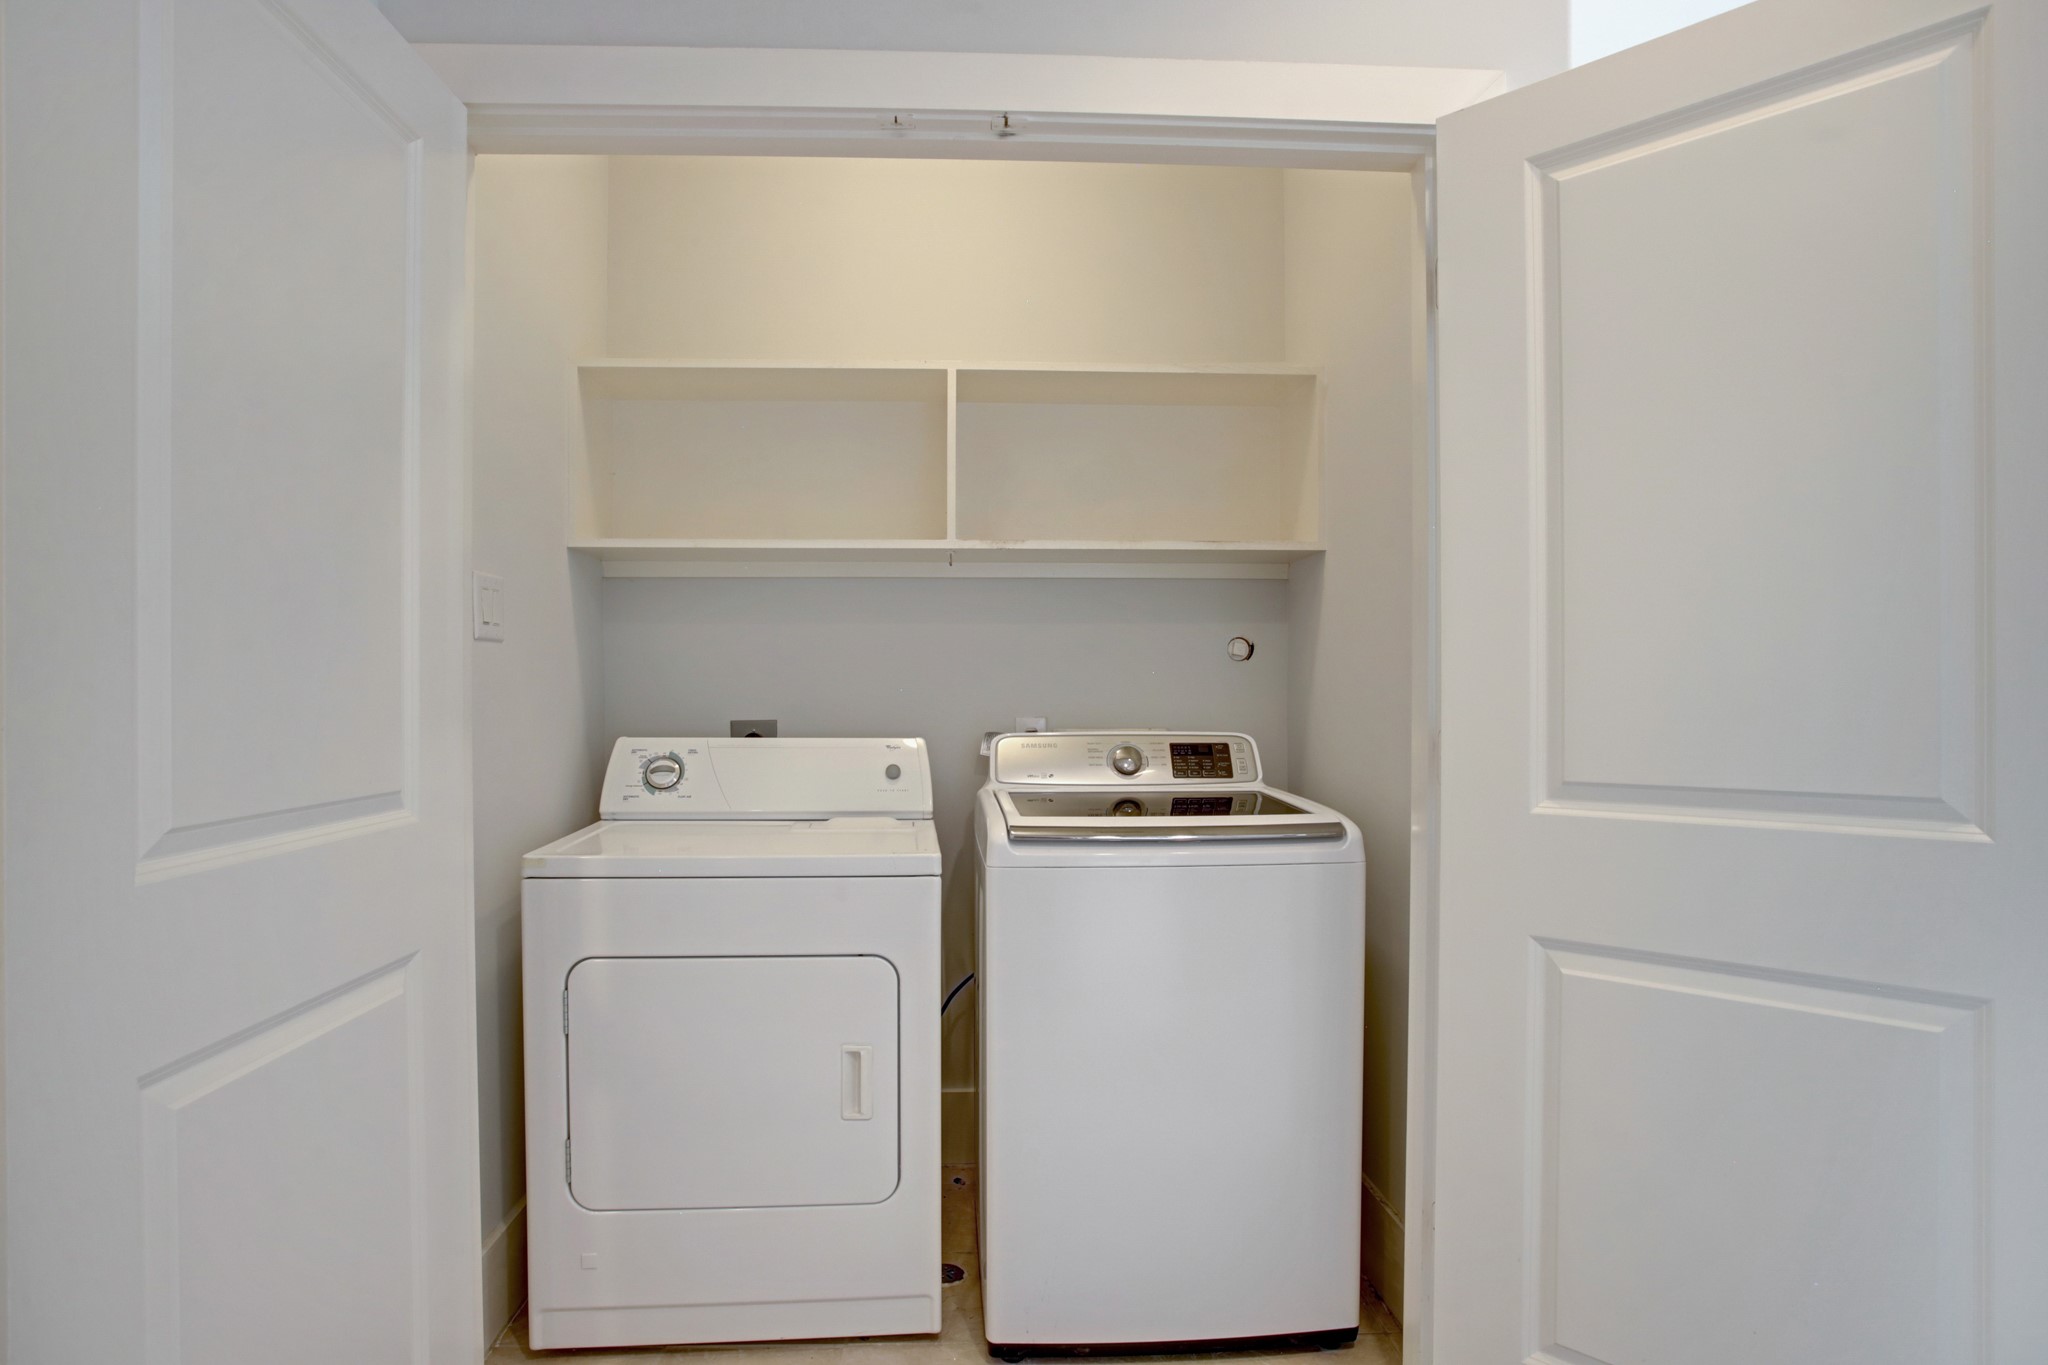 Laundry room 3rd floor. Full size washer and dryer.